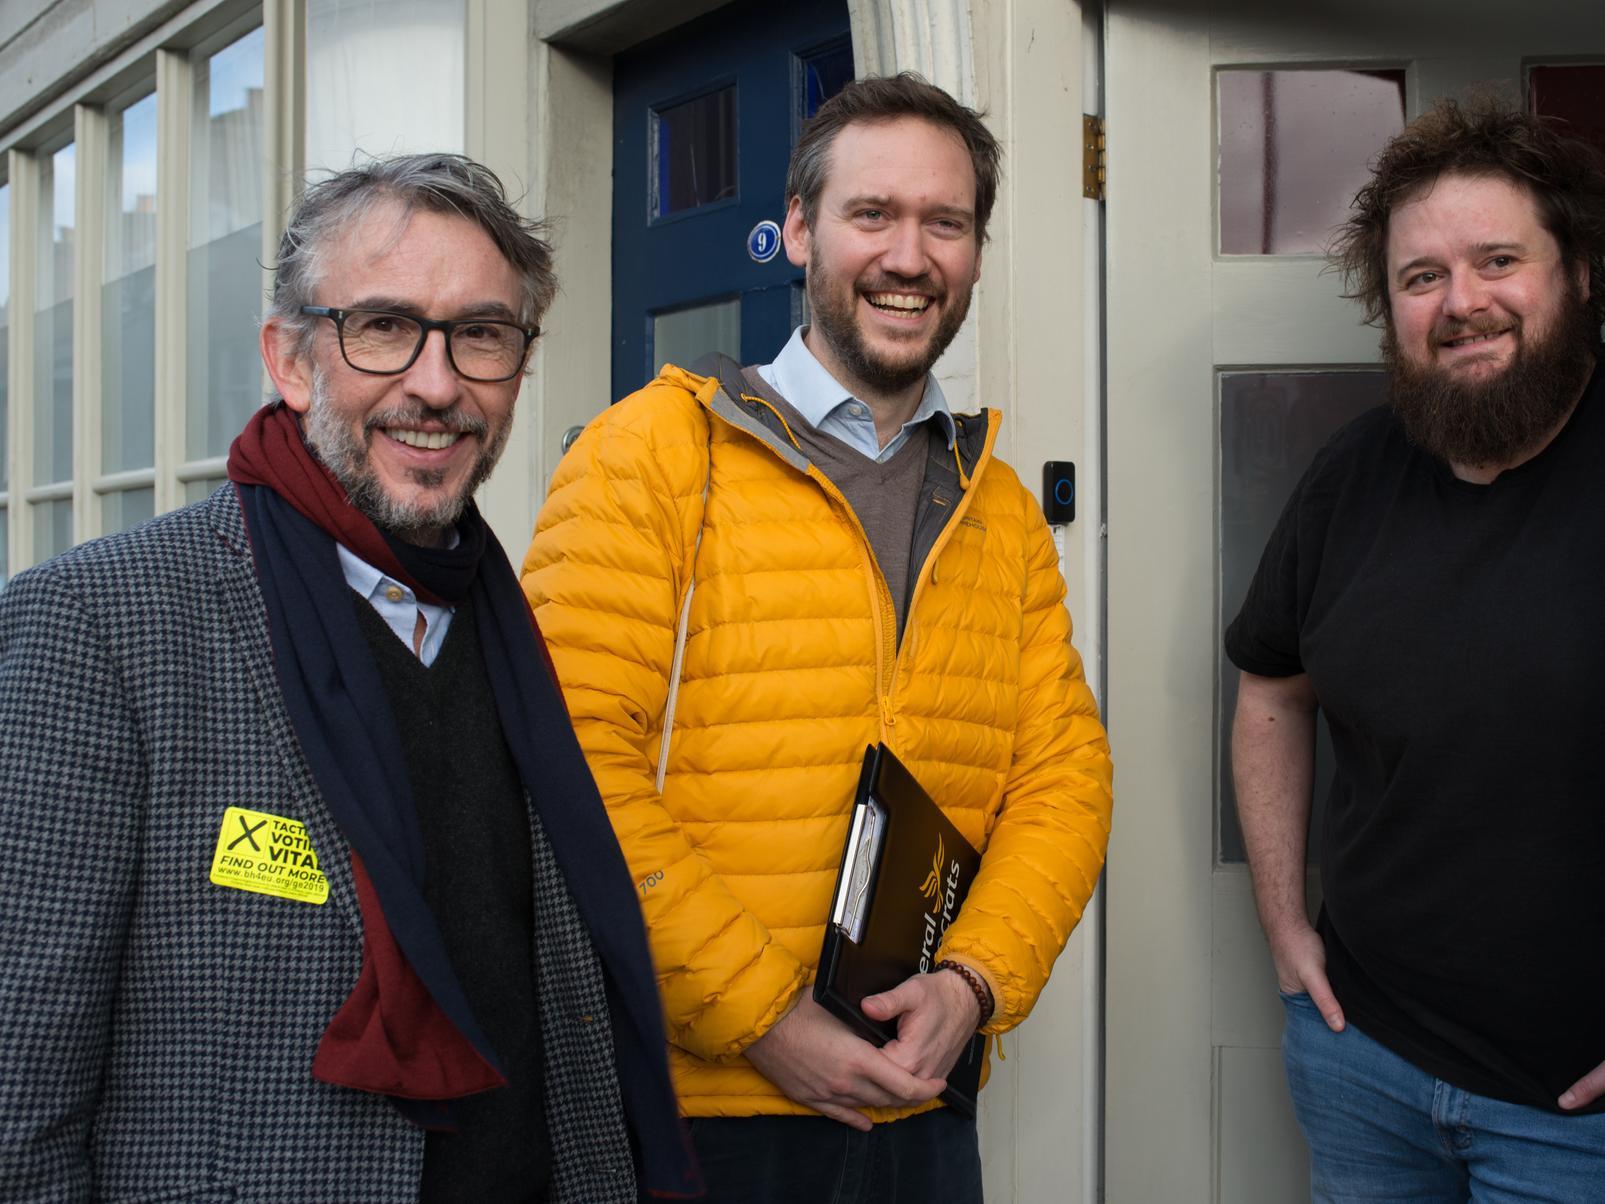 Steve Coogan with Lib Dems candidate Oli Henman in Lewes